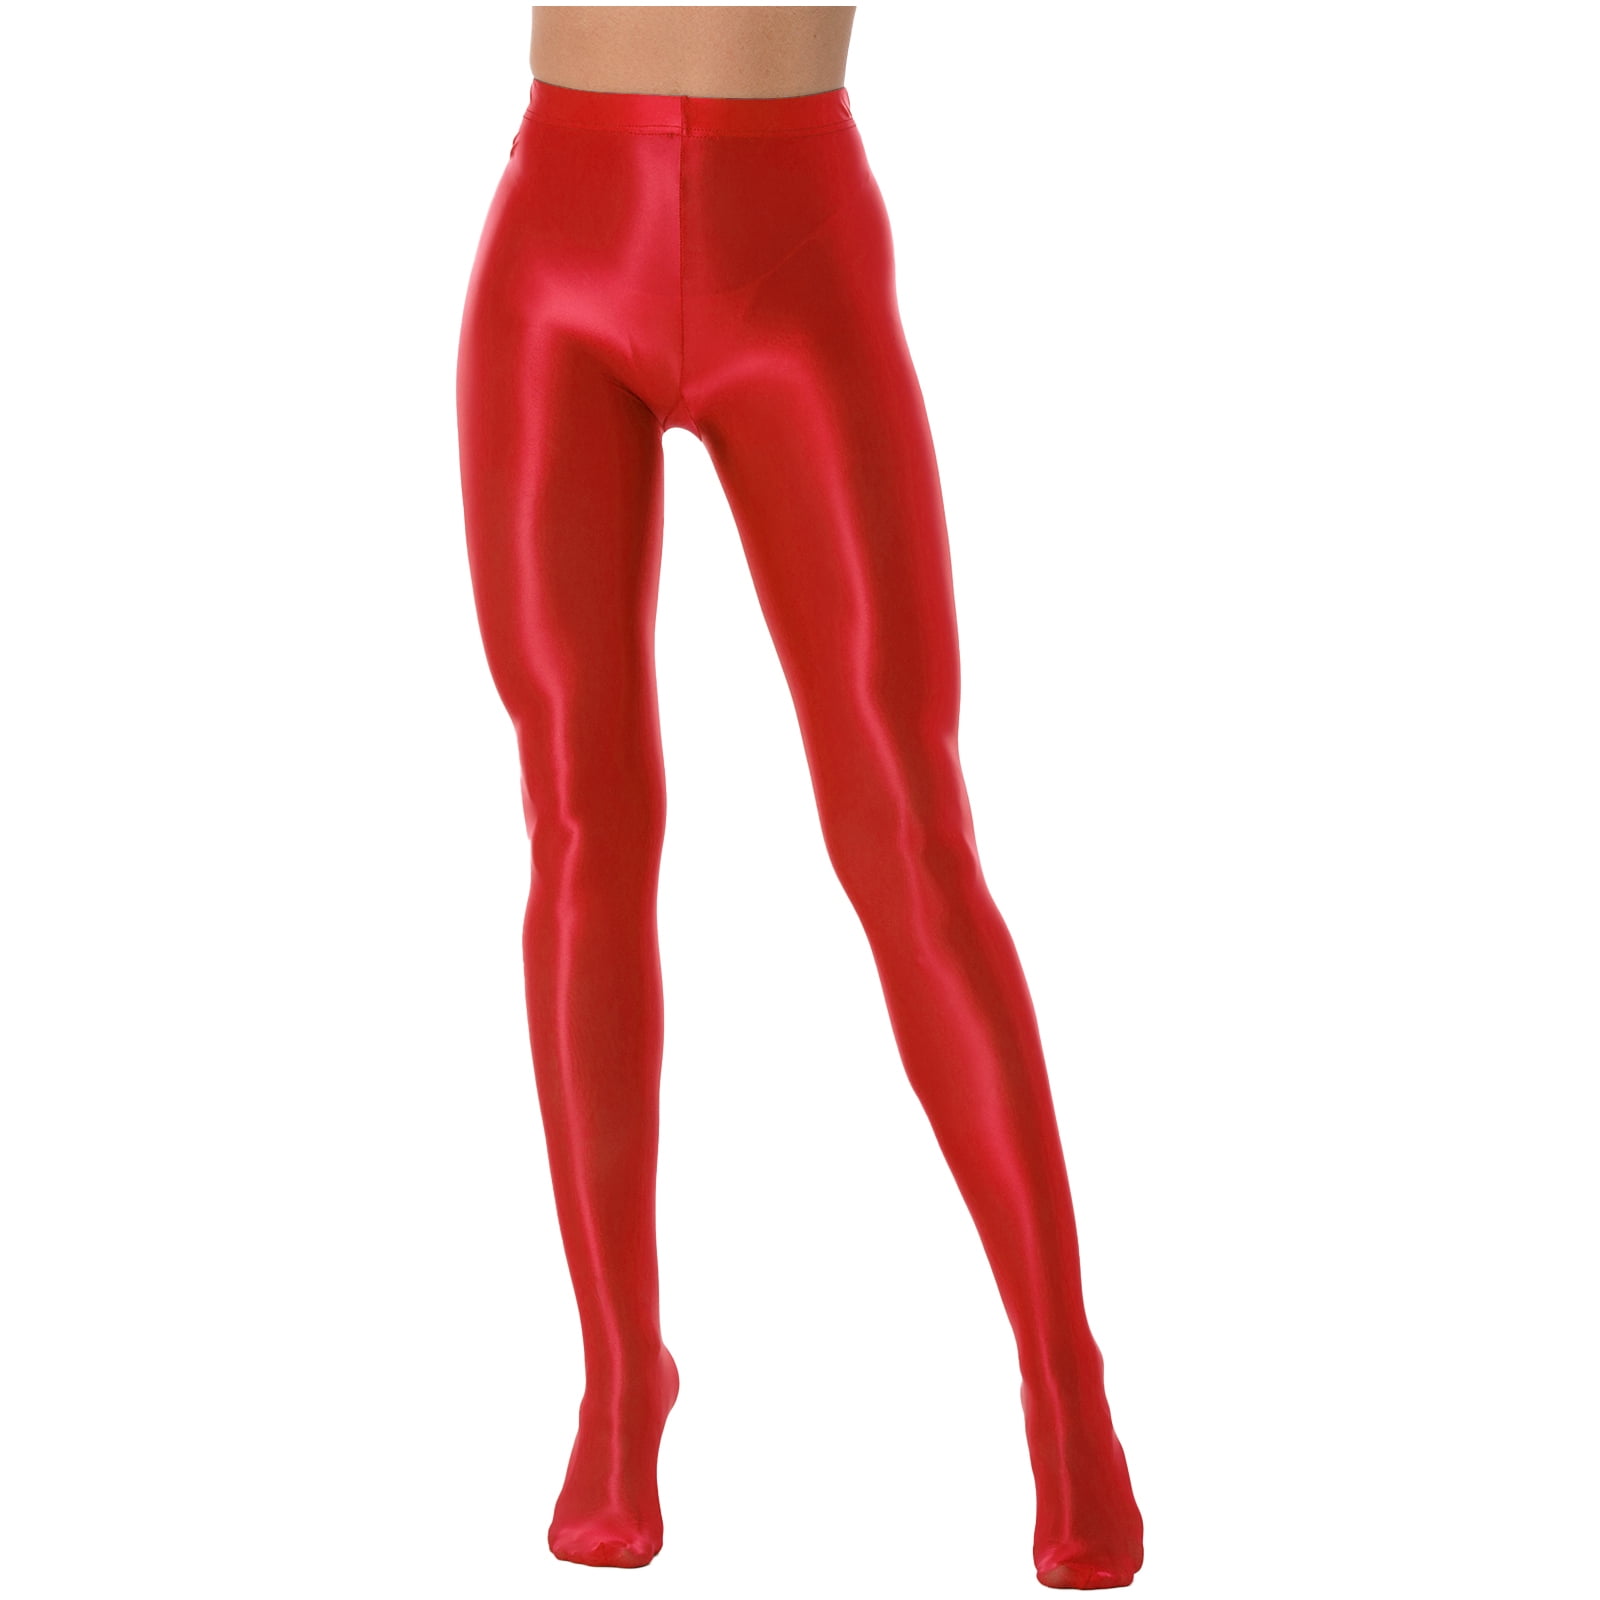 inhzoy Woman Shiny Oil Glossy Footed Pantyhose Tights Leggings Pink M